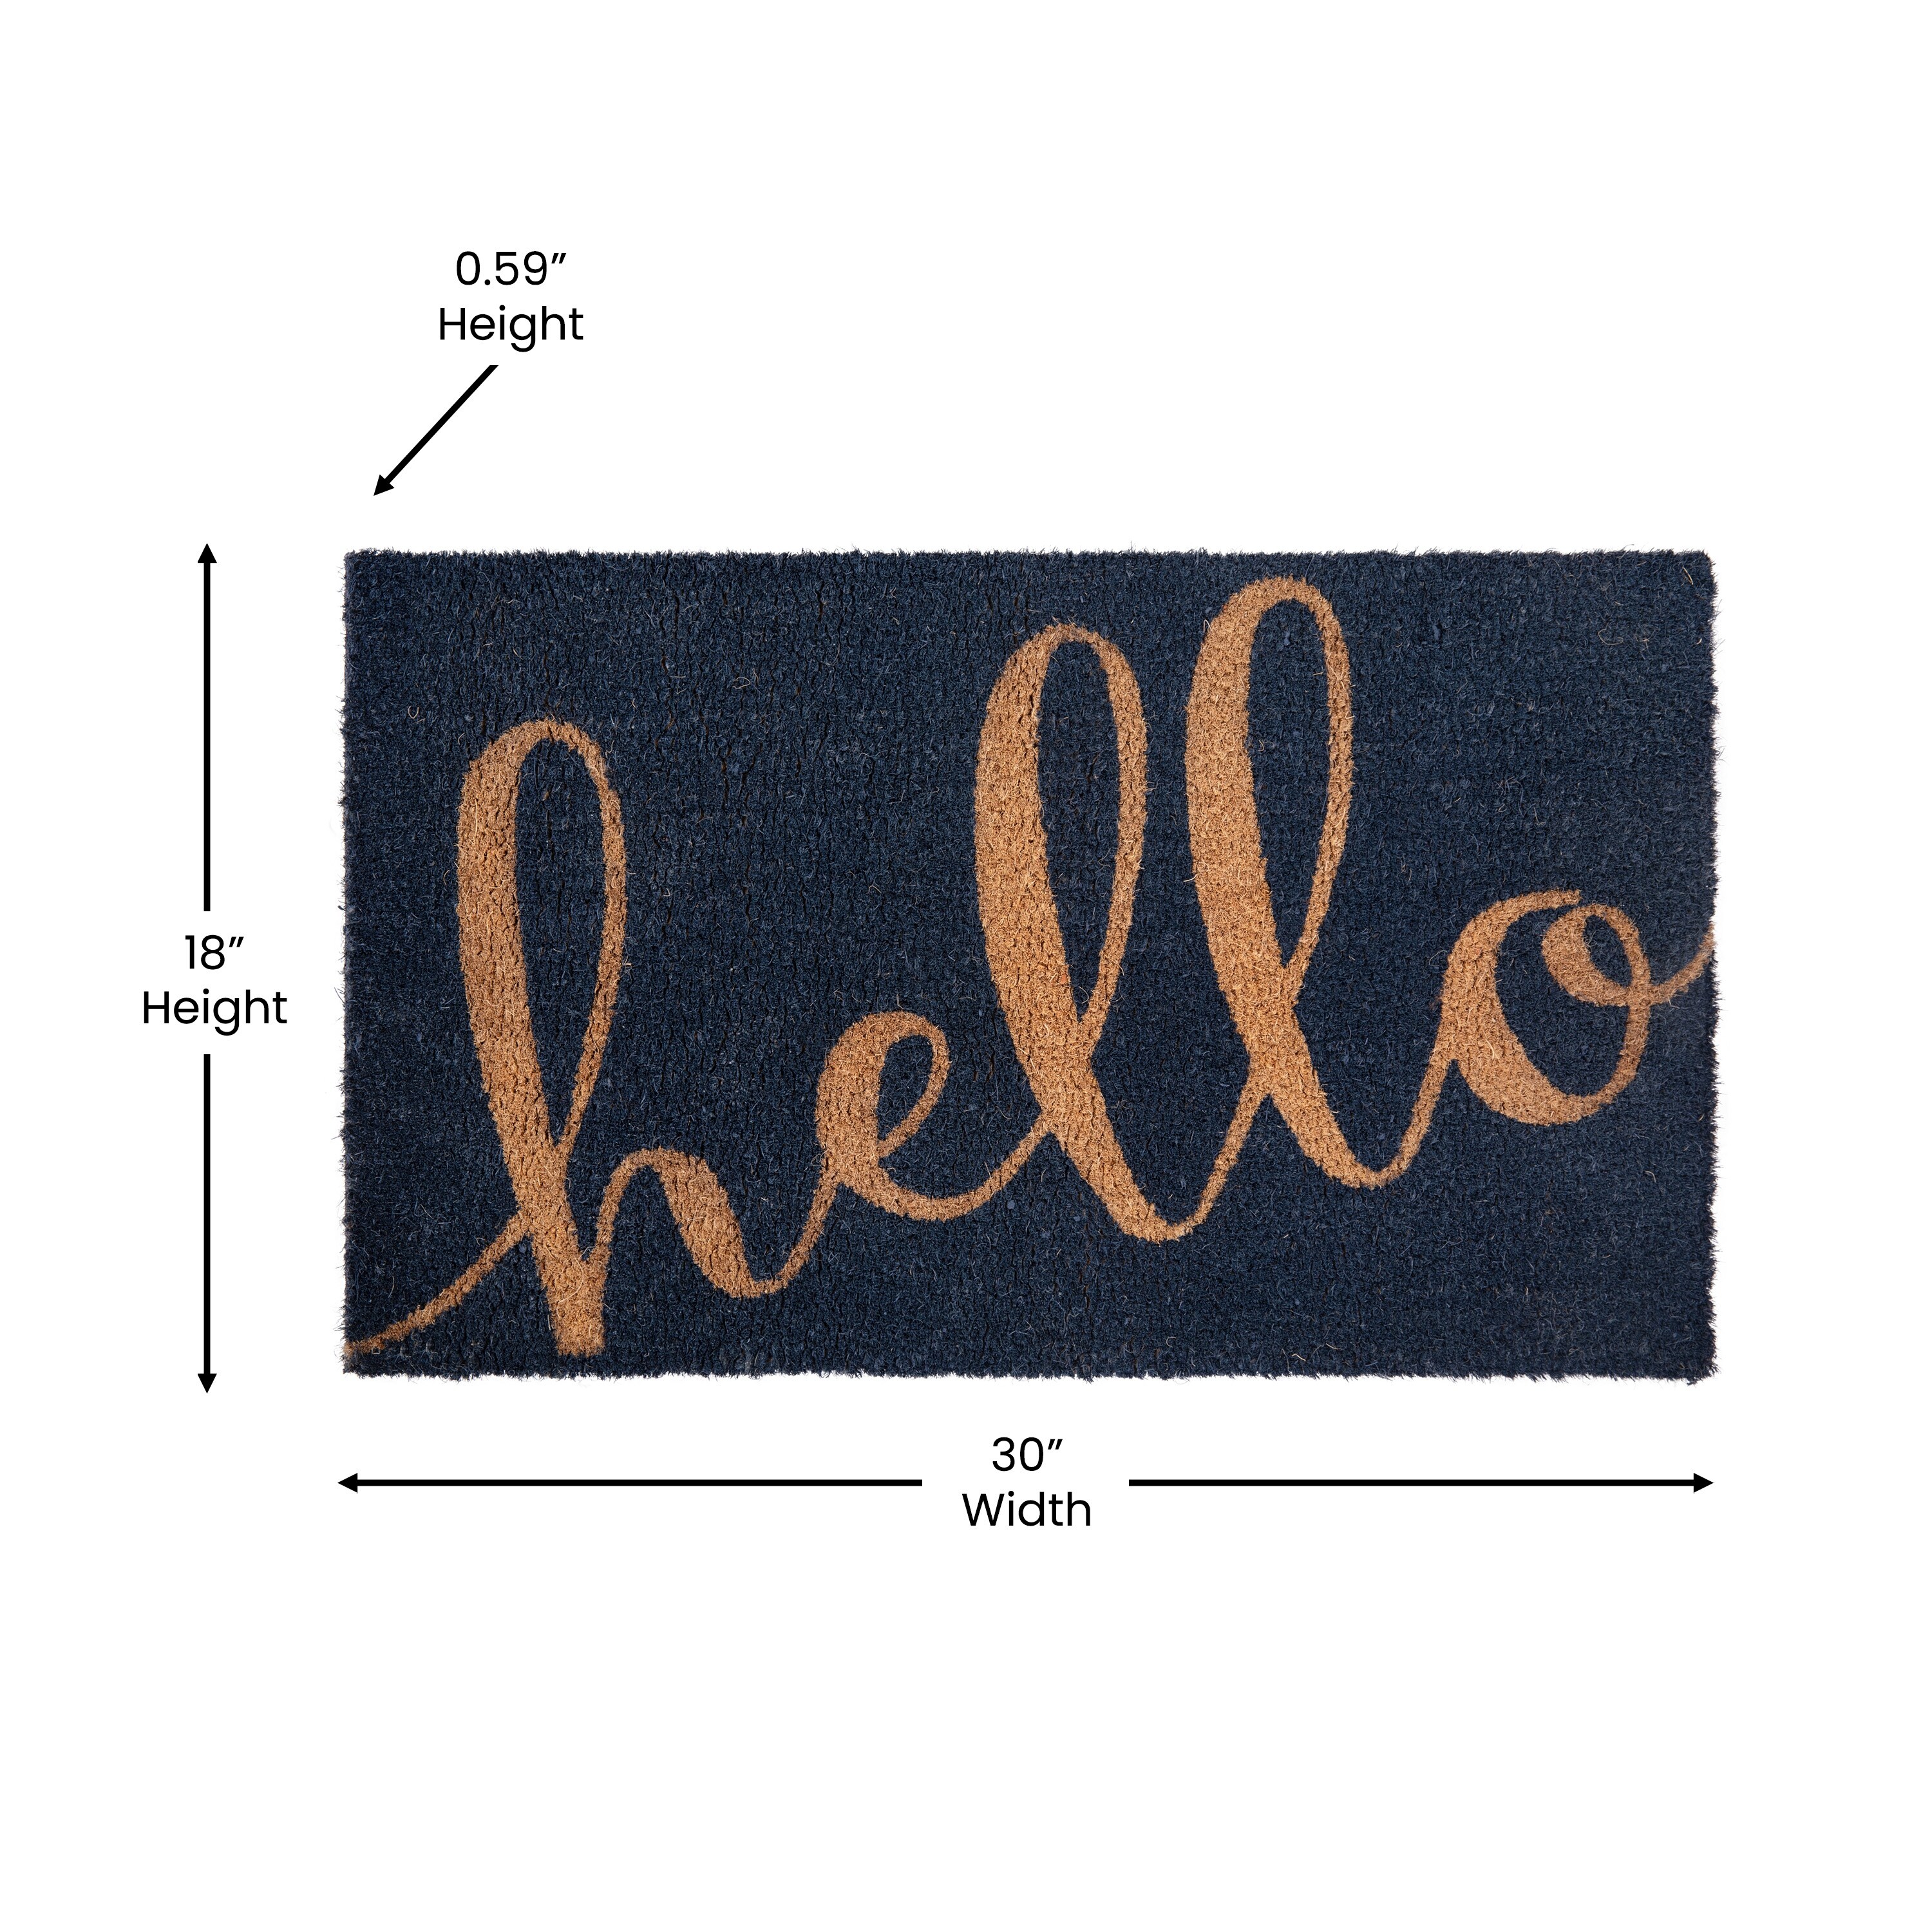 https://ak1.ostkcdn.com/images/products/is/images/direct/656ca7f3500da5e191ce410cfce14ab4249306ef/Indoor-Outdoor-Coir-Doormat-with-Hello-Message-and-Non-Slip-Back.jpg